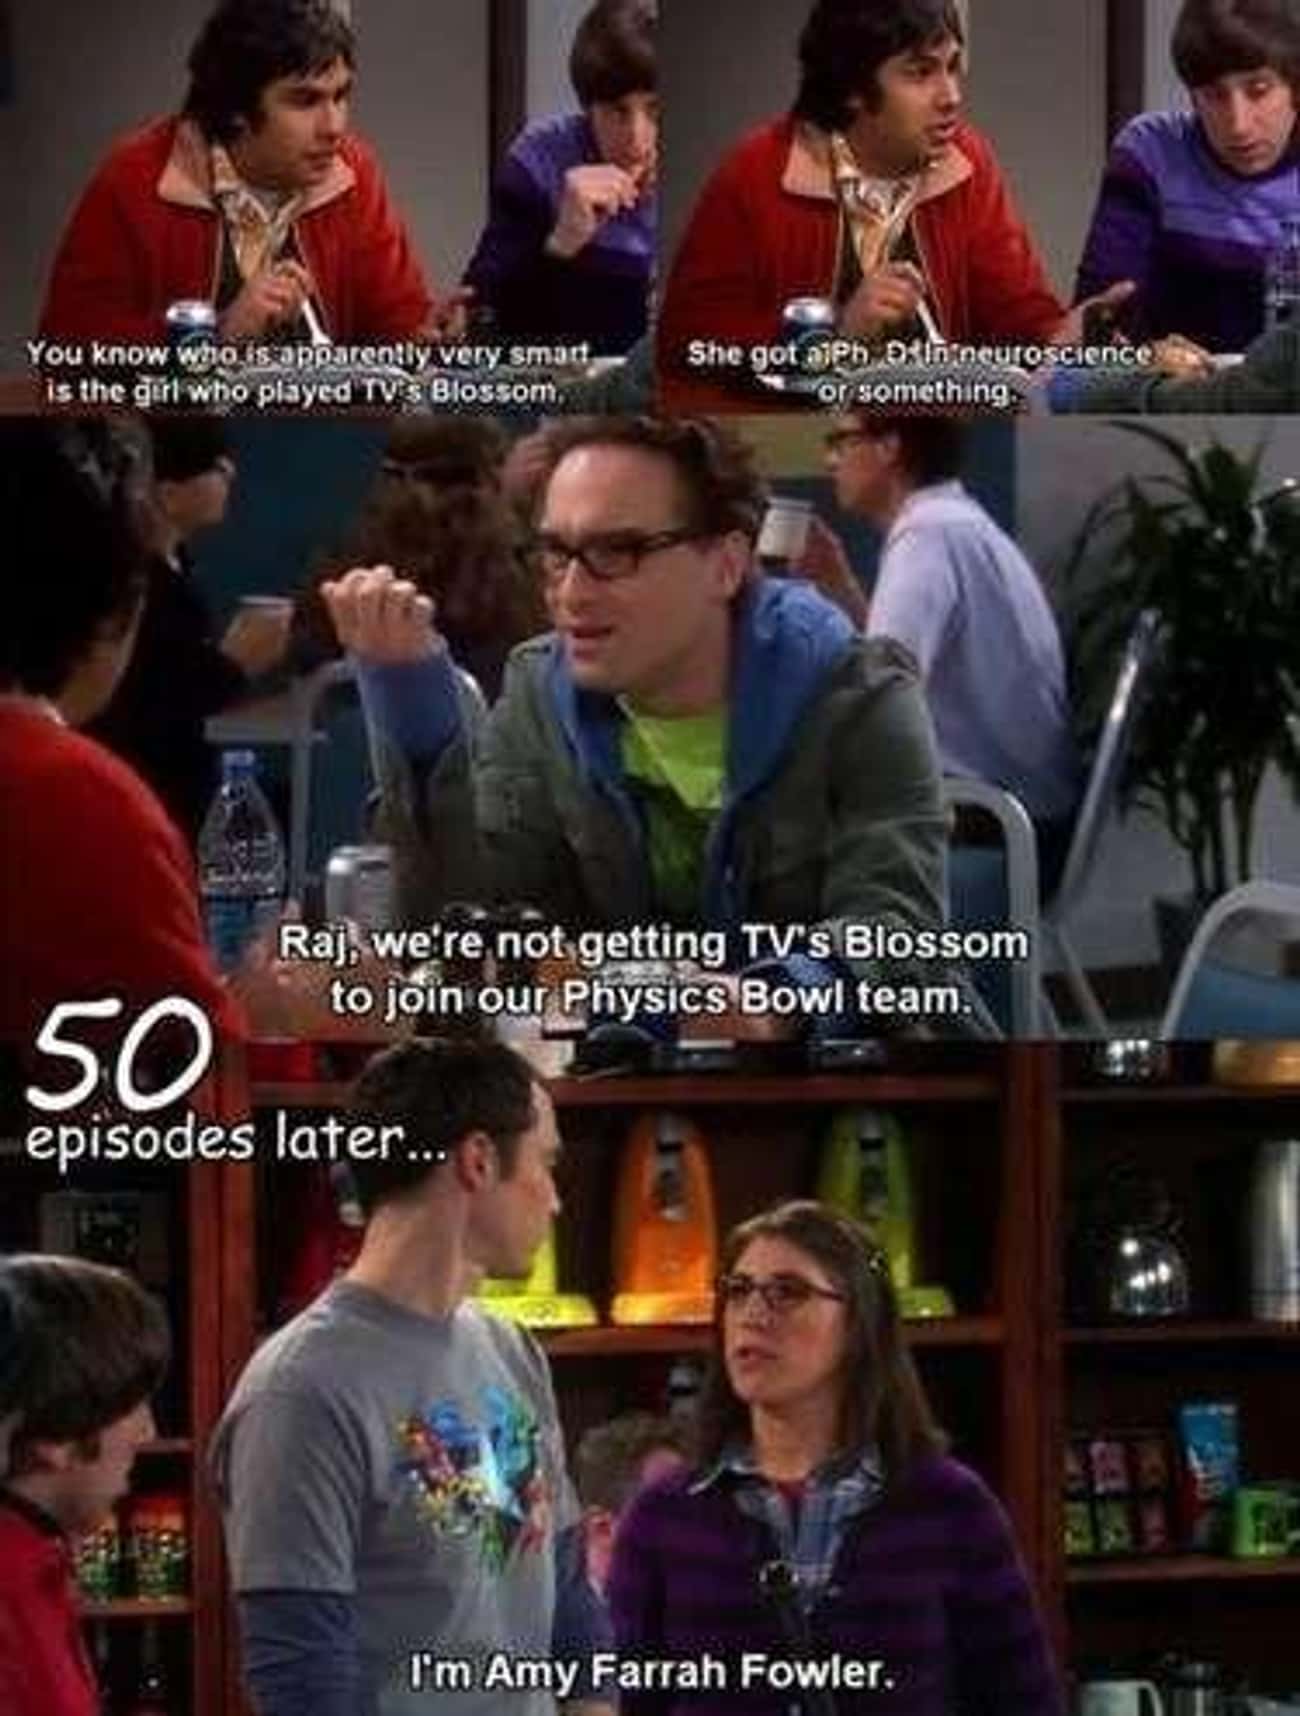 Amy's Inclusion In 'The Big Bang Theory'